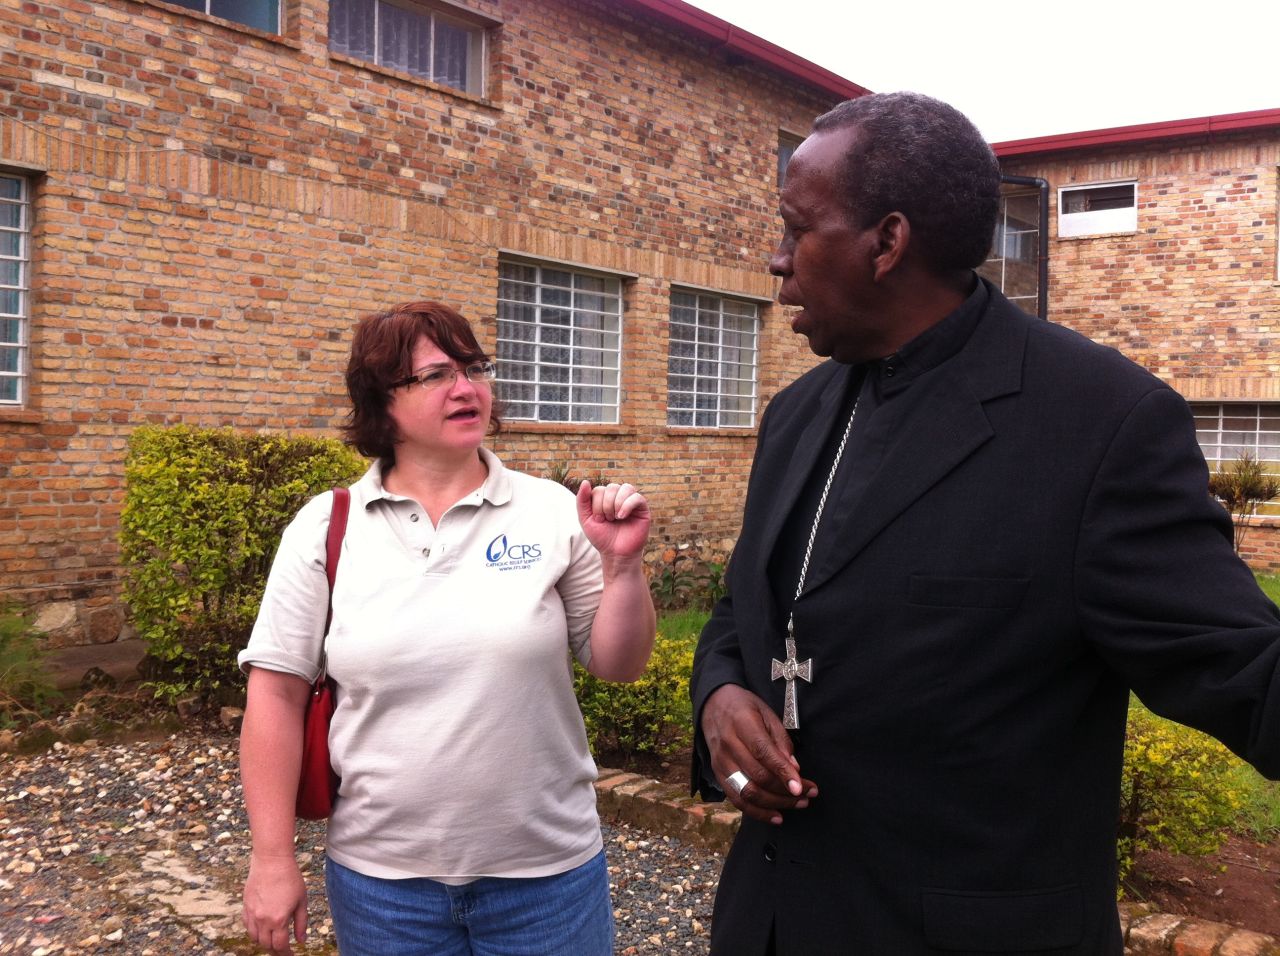 Leann Hager, Catholic Relief Services country representative in Rwanda until 2014, speaks with a local bishop about working together to reconcile communities after the genocide.